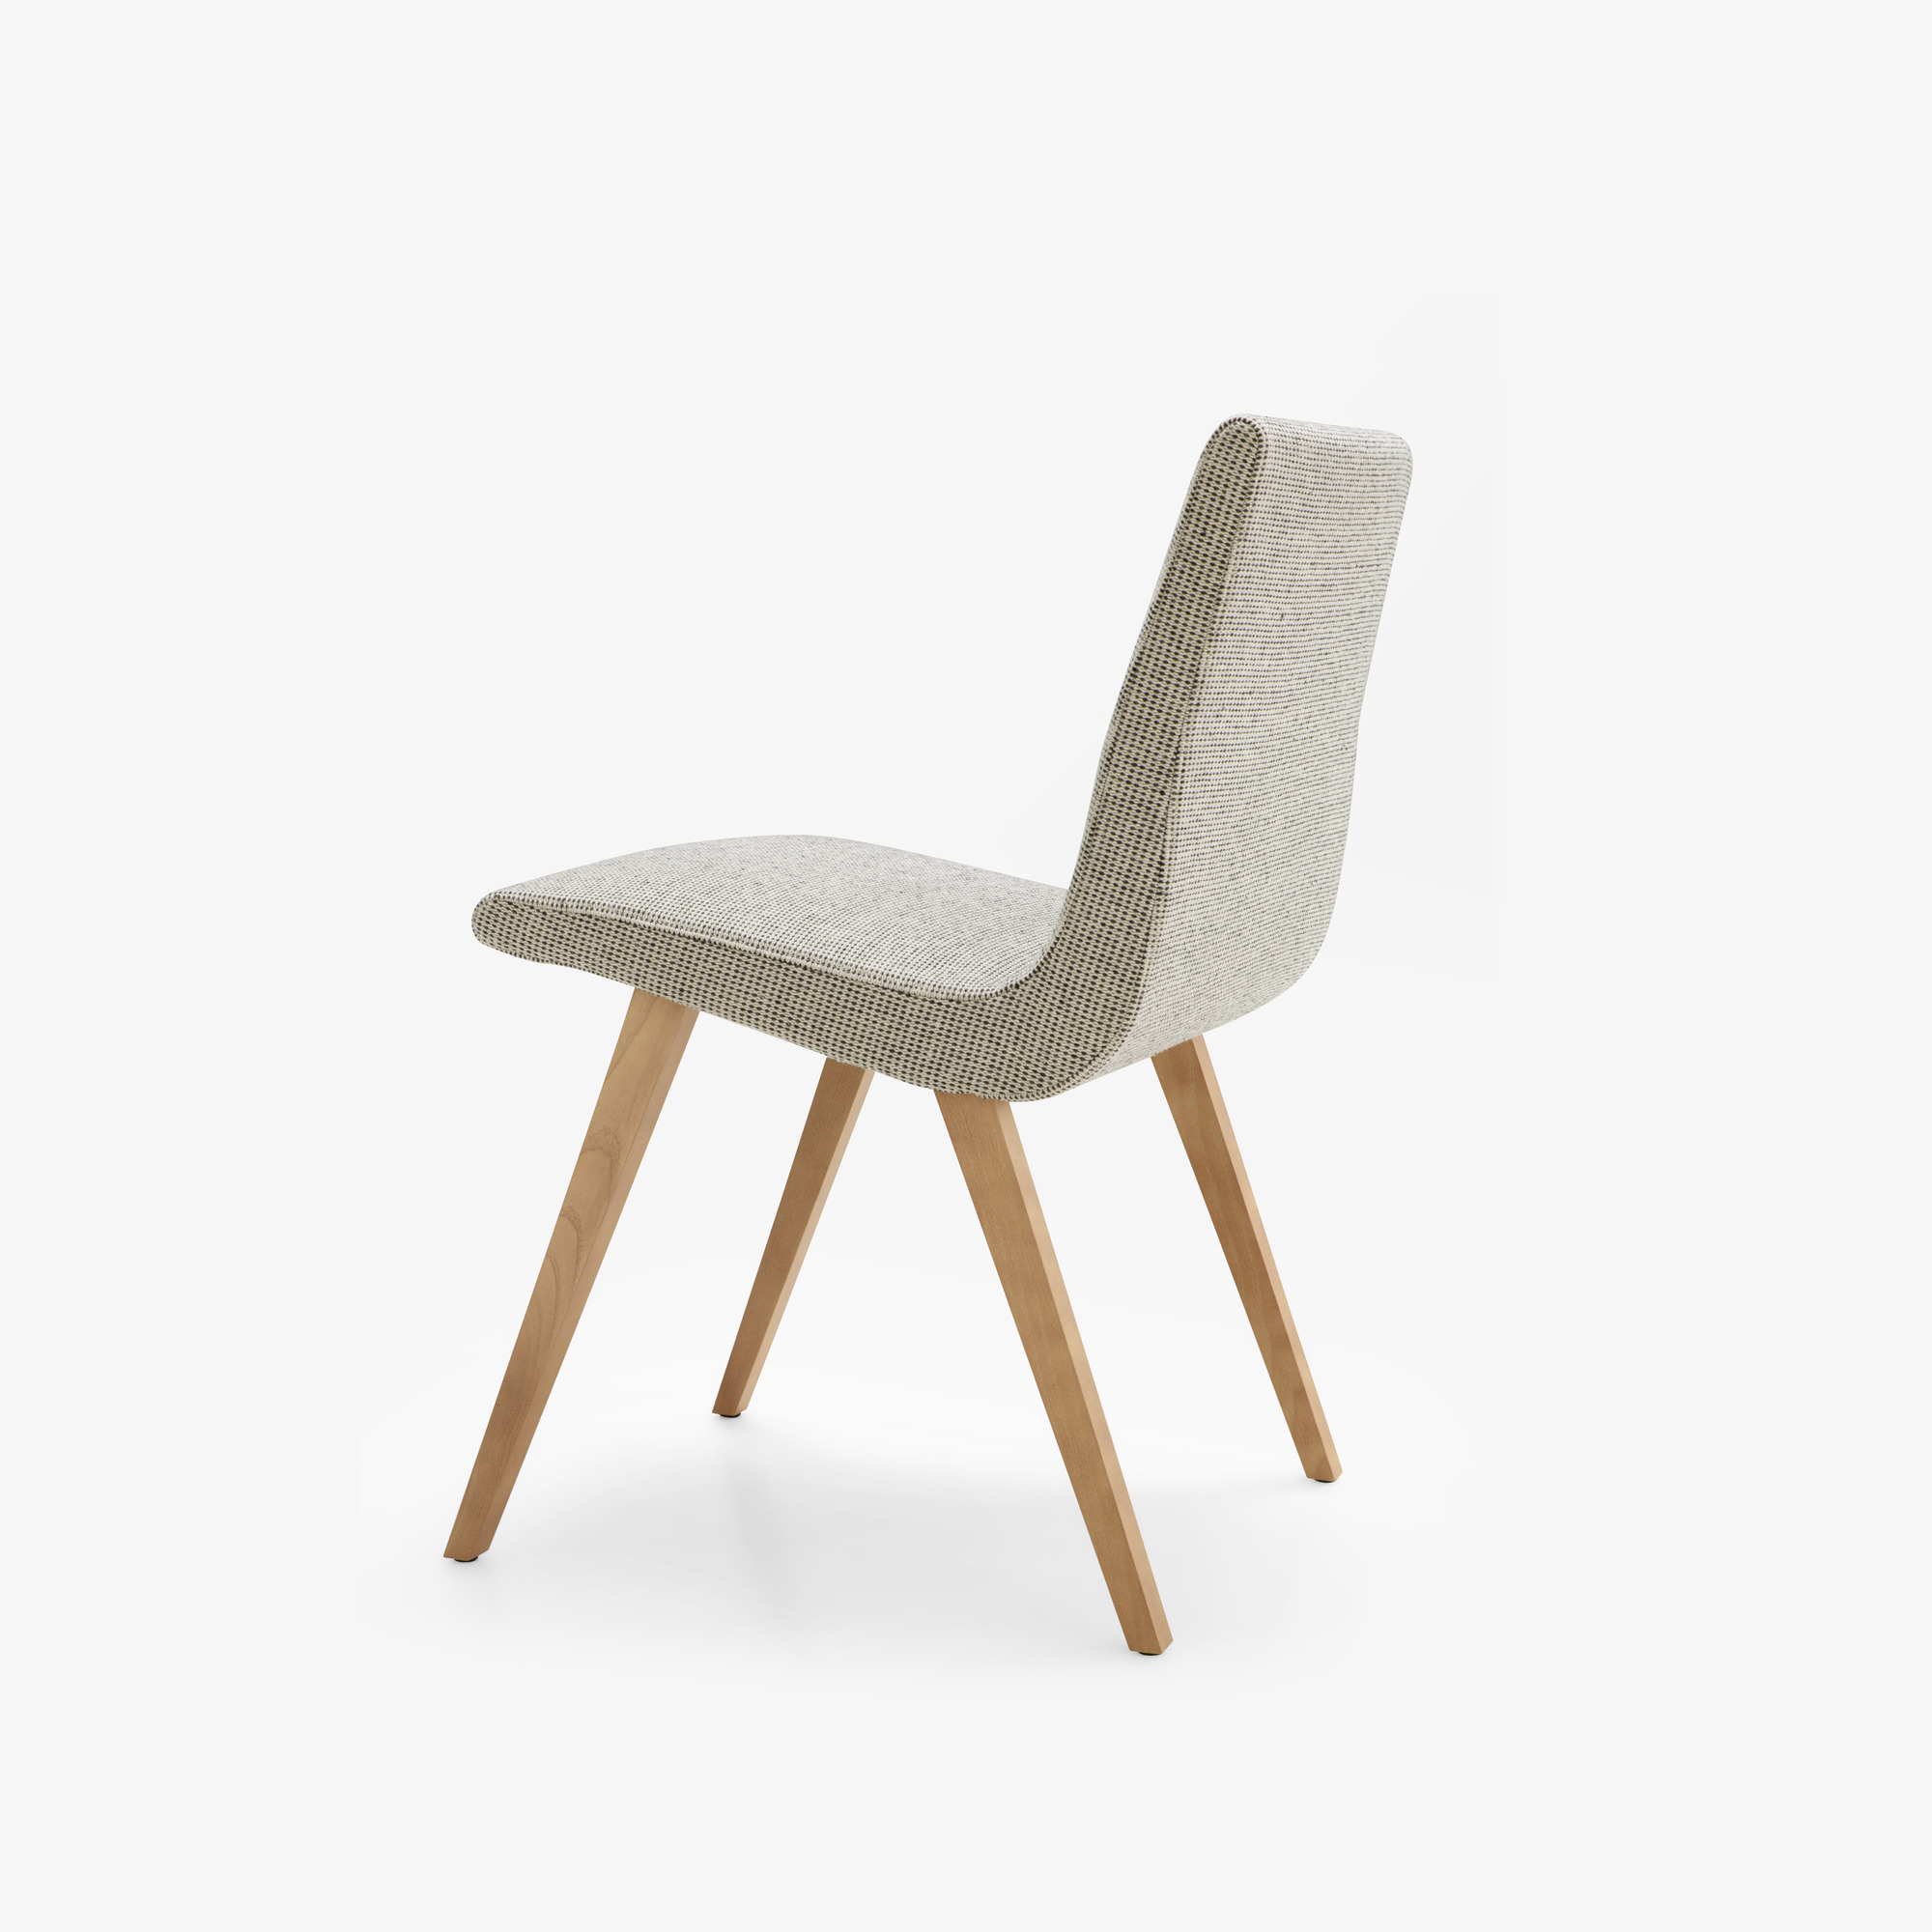 Image Dining chair wooden base 3